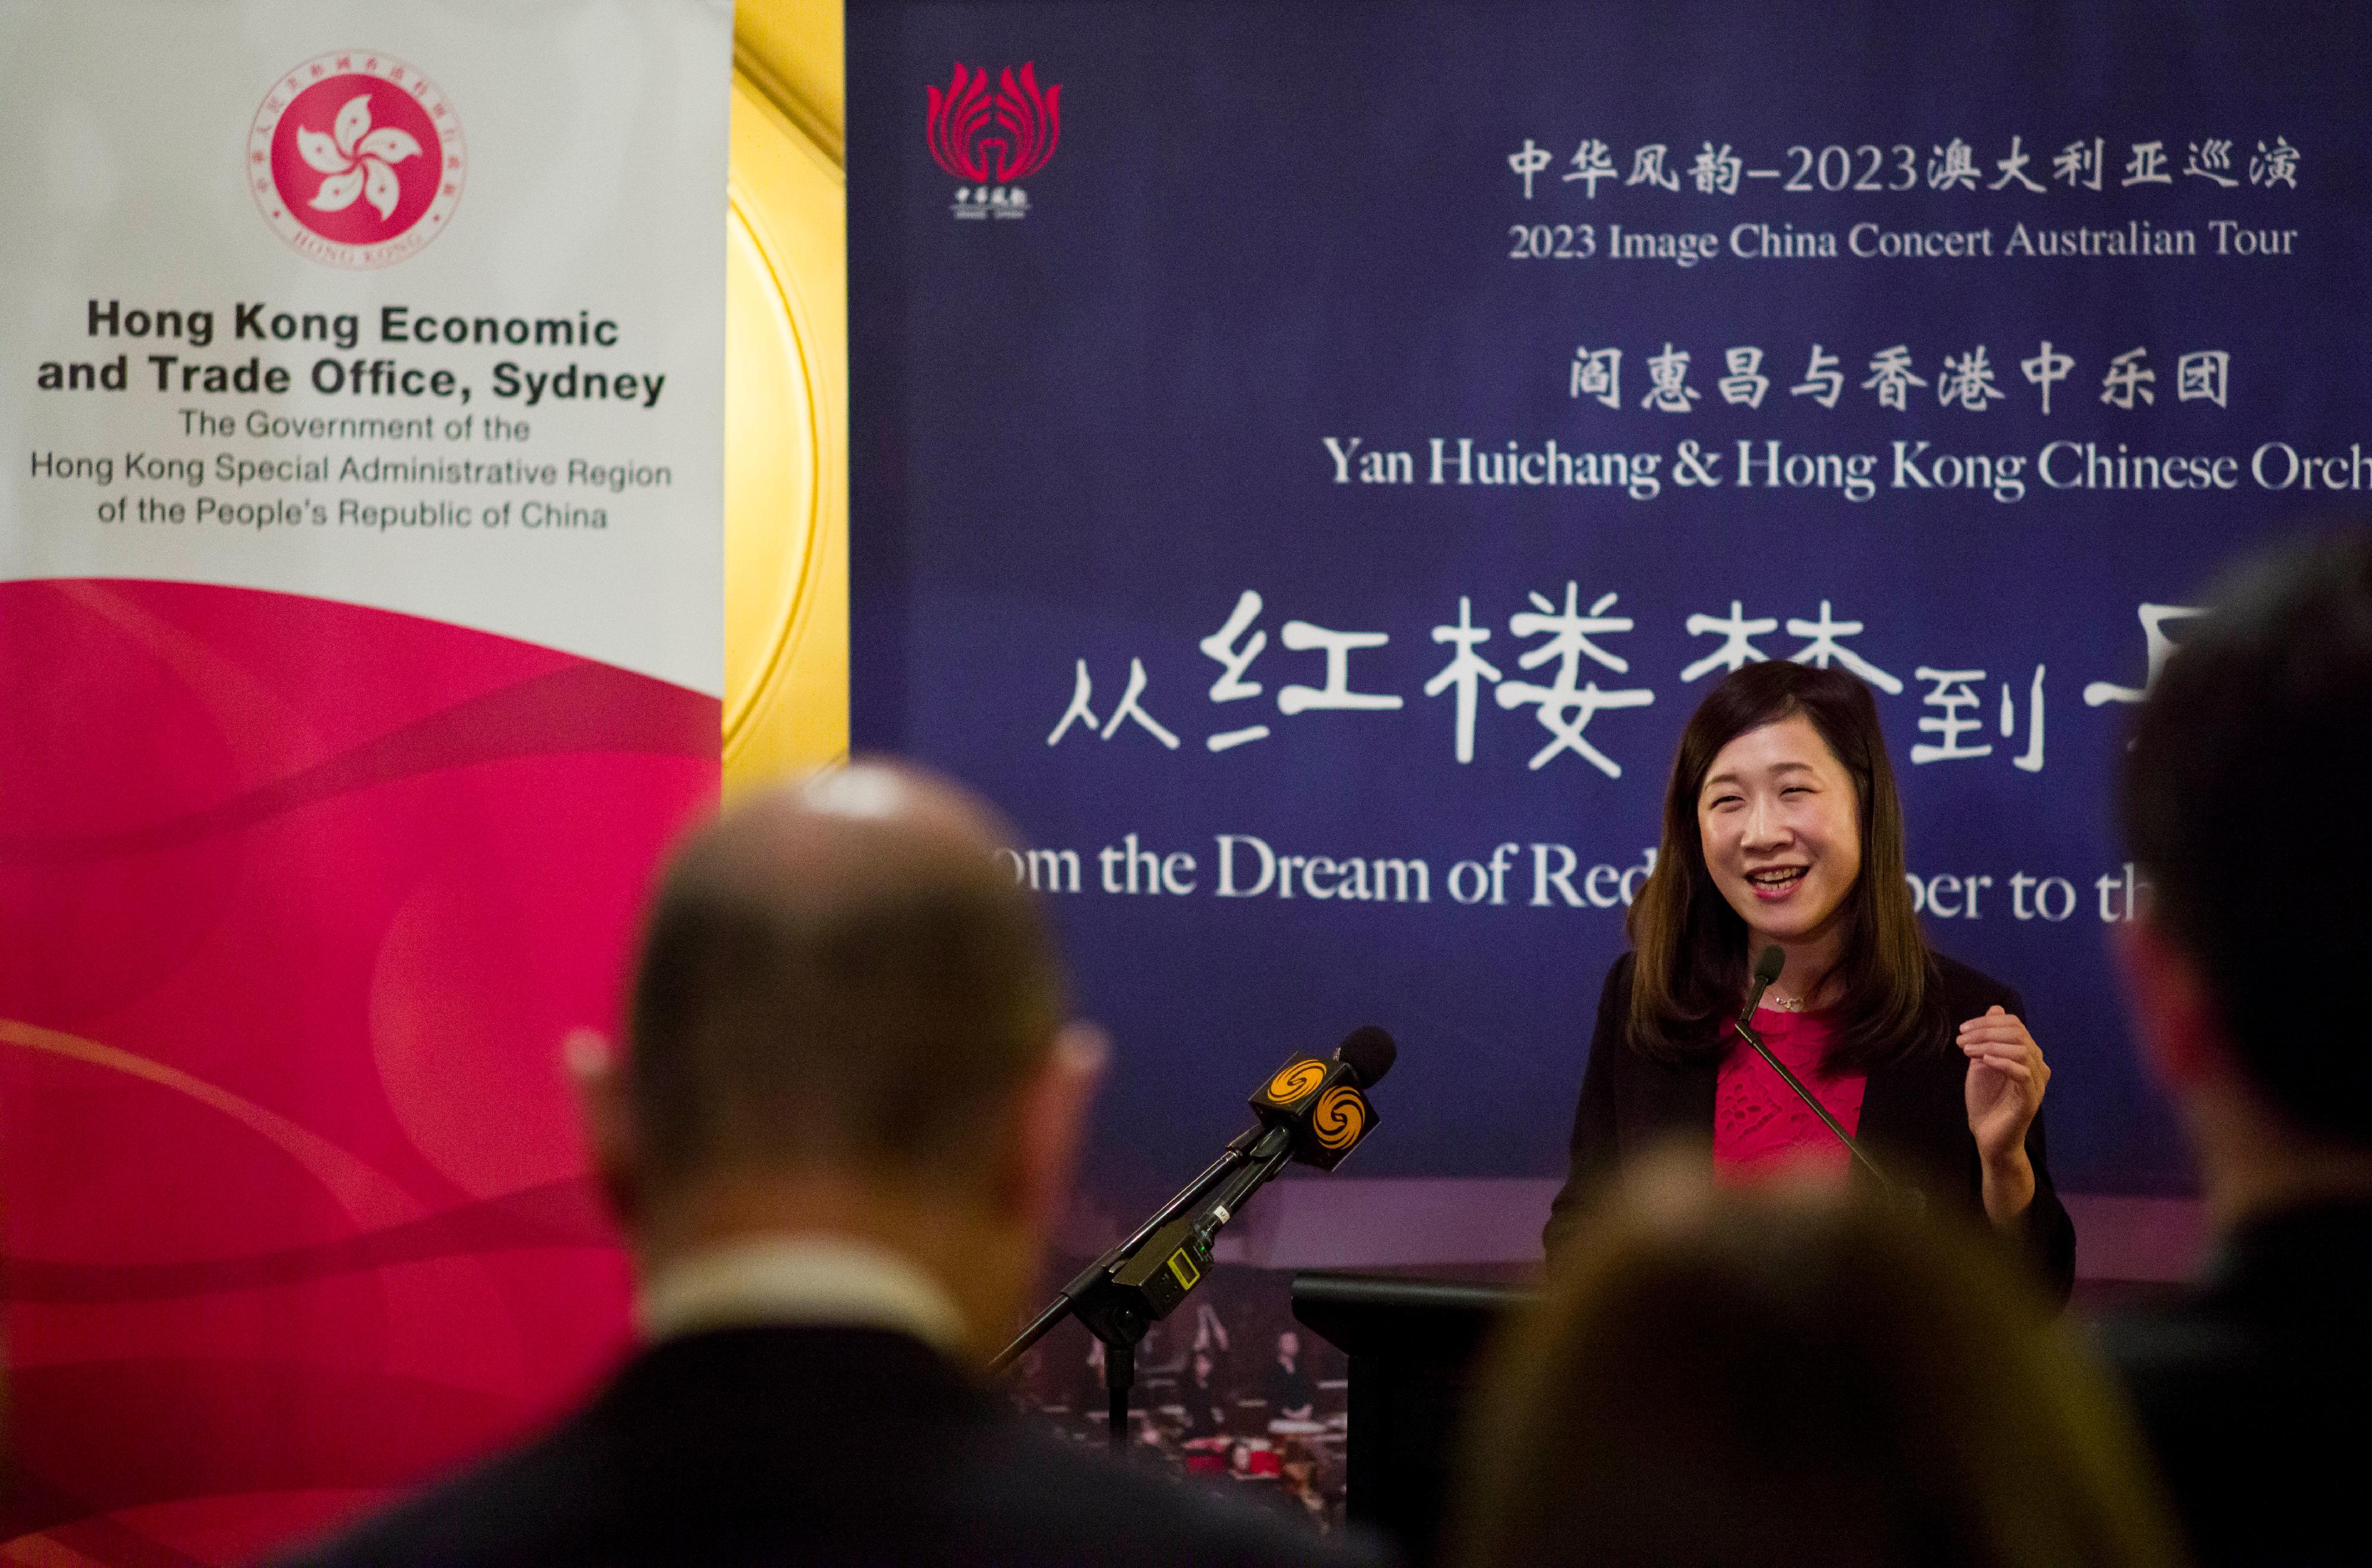 The Hong Kong Economic and Trade Office, Sydney (Sydney ETO) is supporting the Hong Kong Chinese Orchestra in its staging of three music concerts in Australia. Photo shows the Director of the Sydney ETO, Miss Trista Lim, delivering a speech at a reception in Sydney yesterday (December 21).